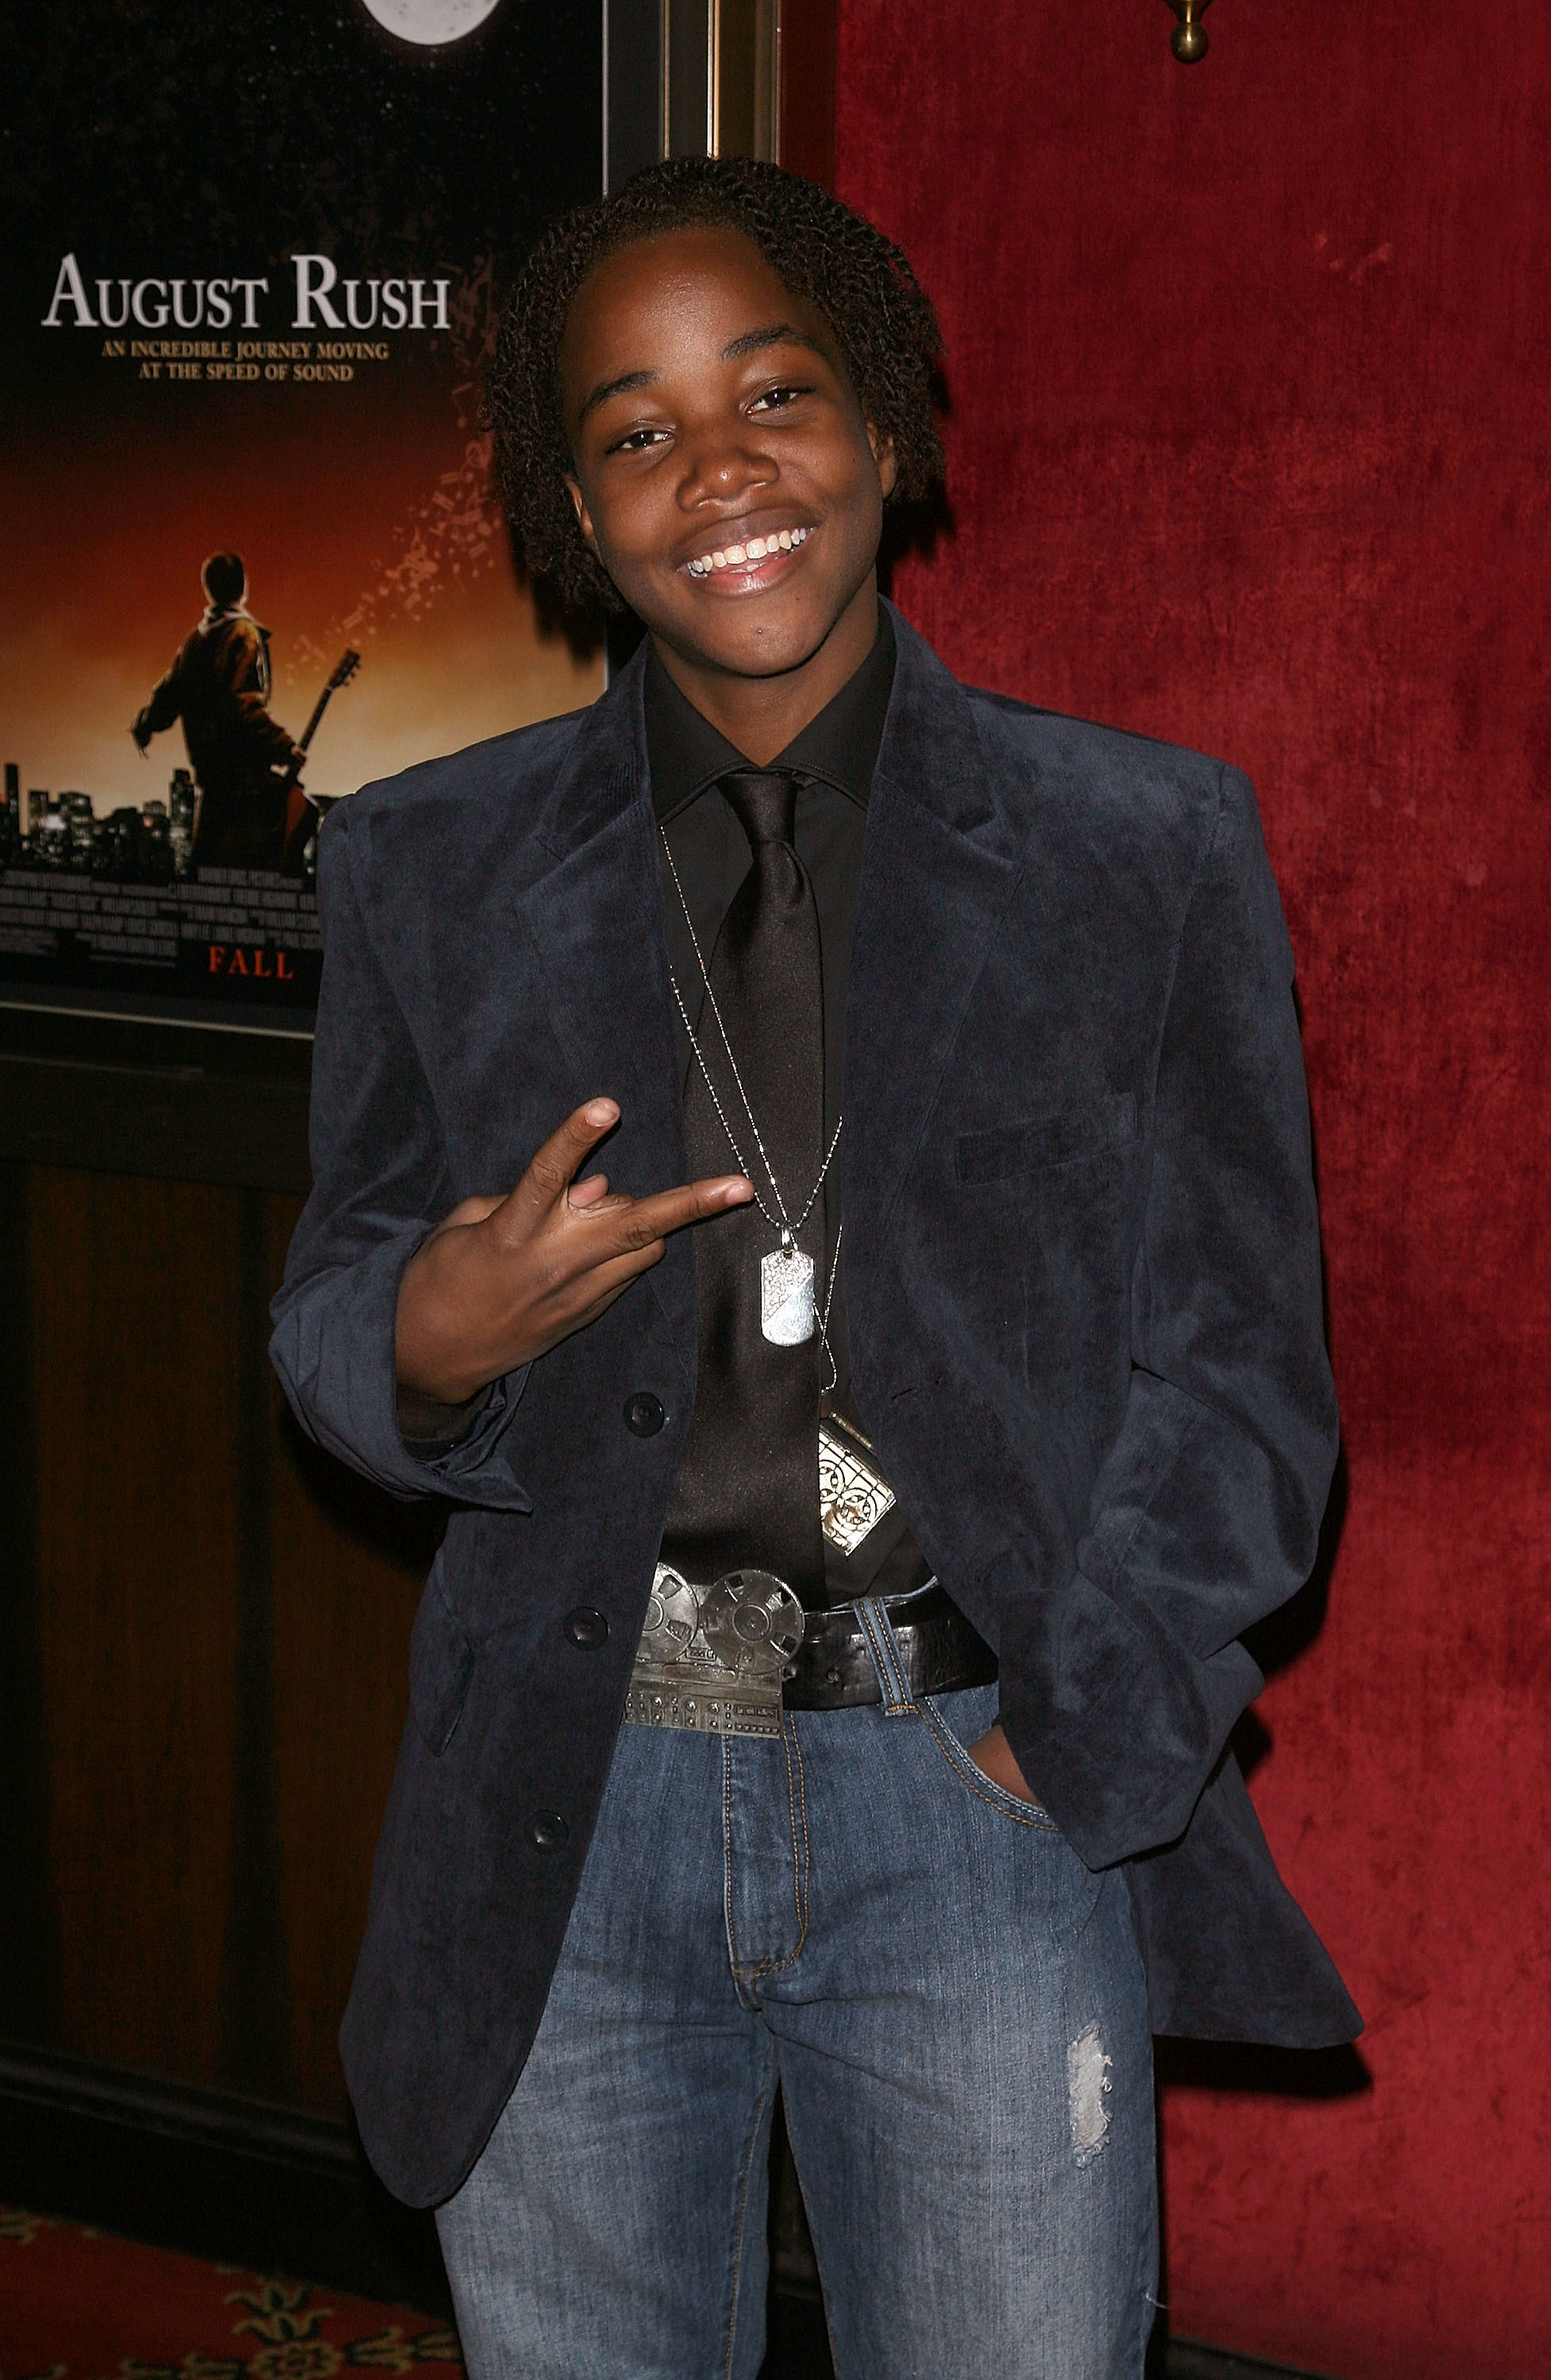 Smiling Leon giving the peace sign and wearing jeans, a tie and shirt, and a jacket